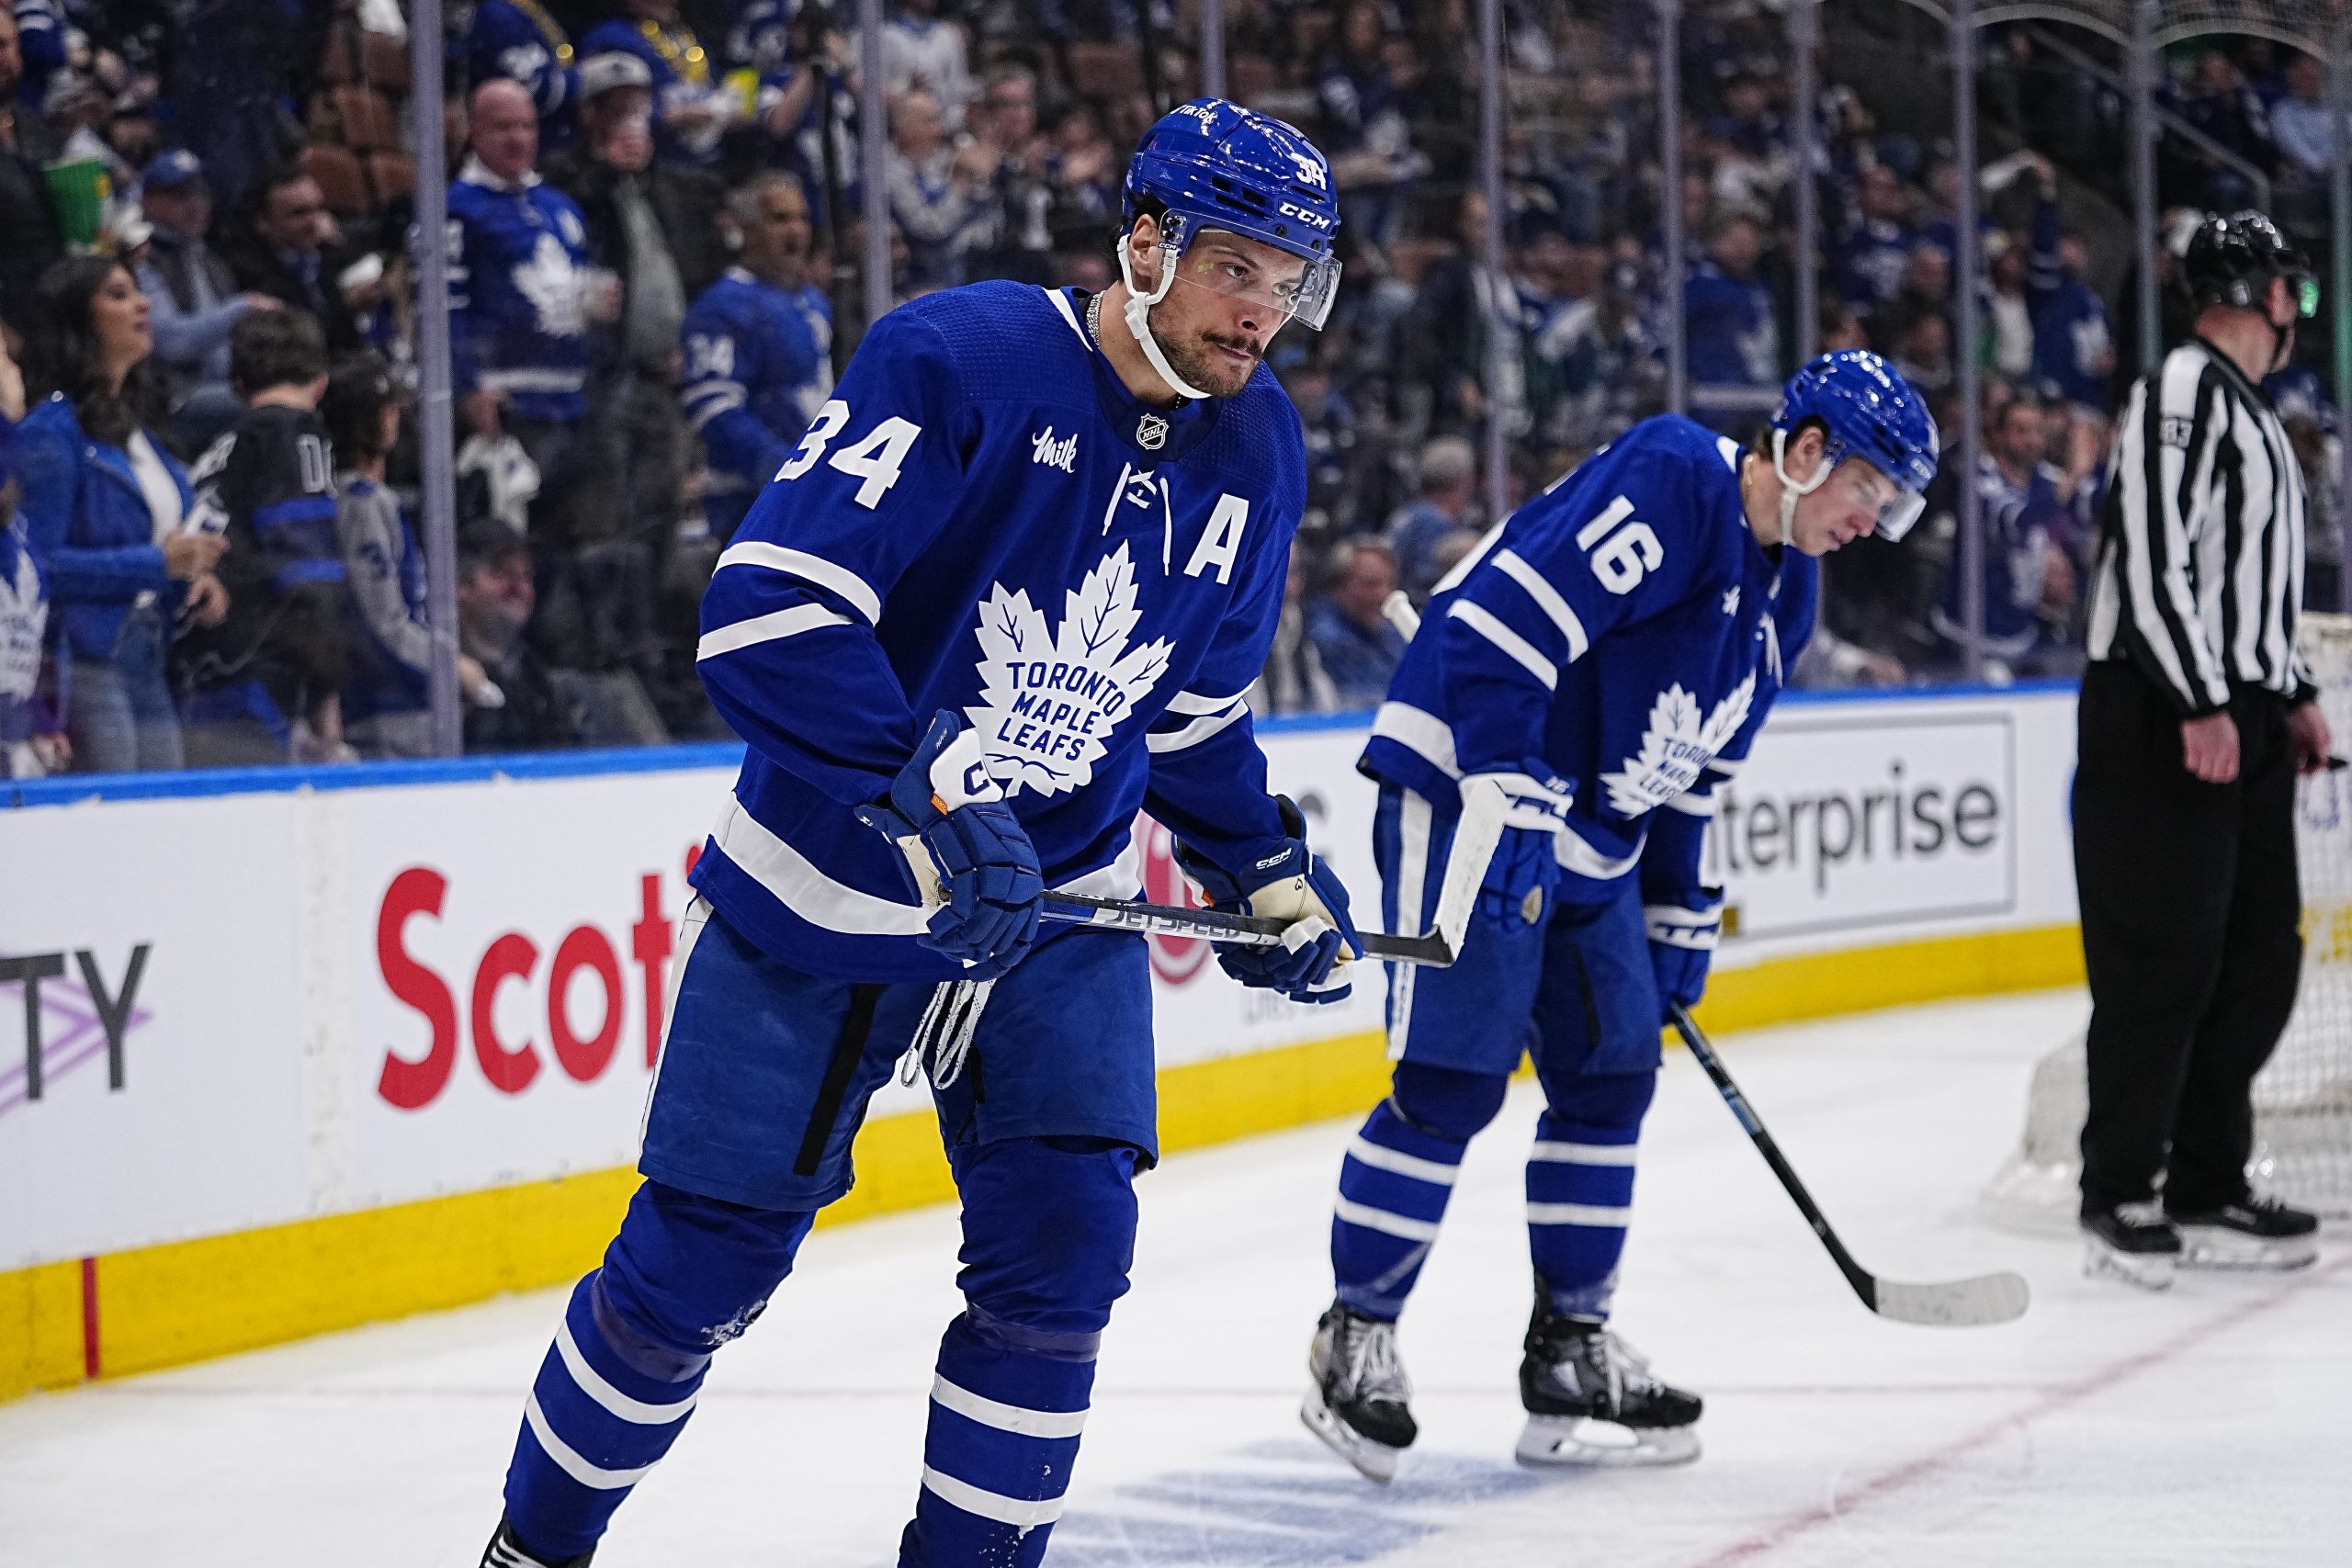 Disastrous Maple Leafs Power Play Leads to First-Round Exit